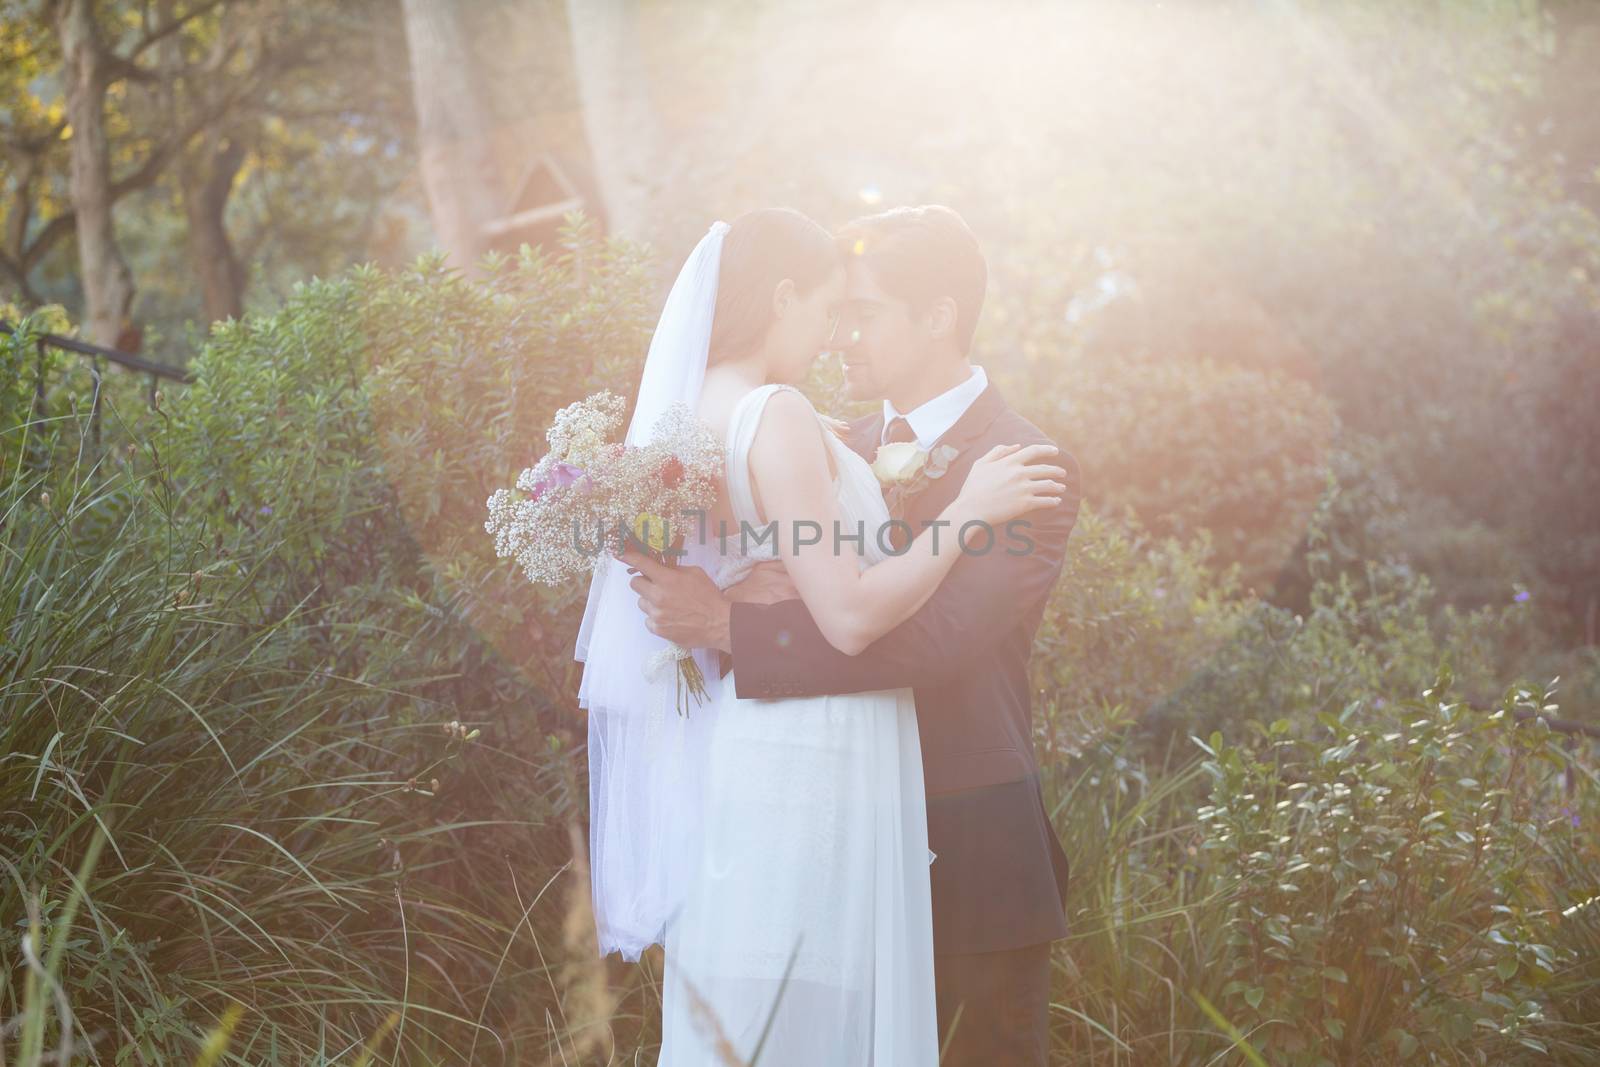 Romantic newlywed couple with eyes closed embracing while standing in park